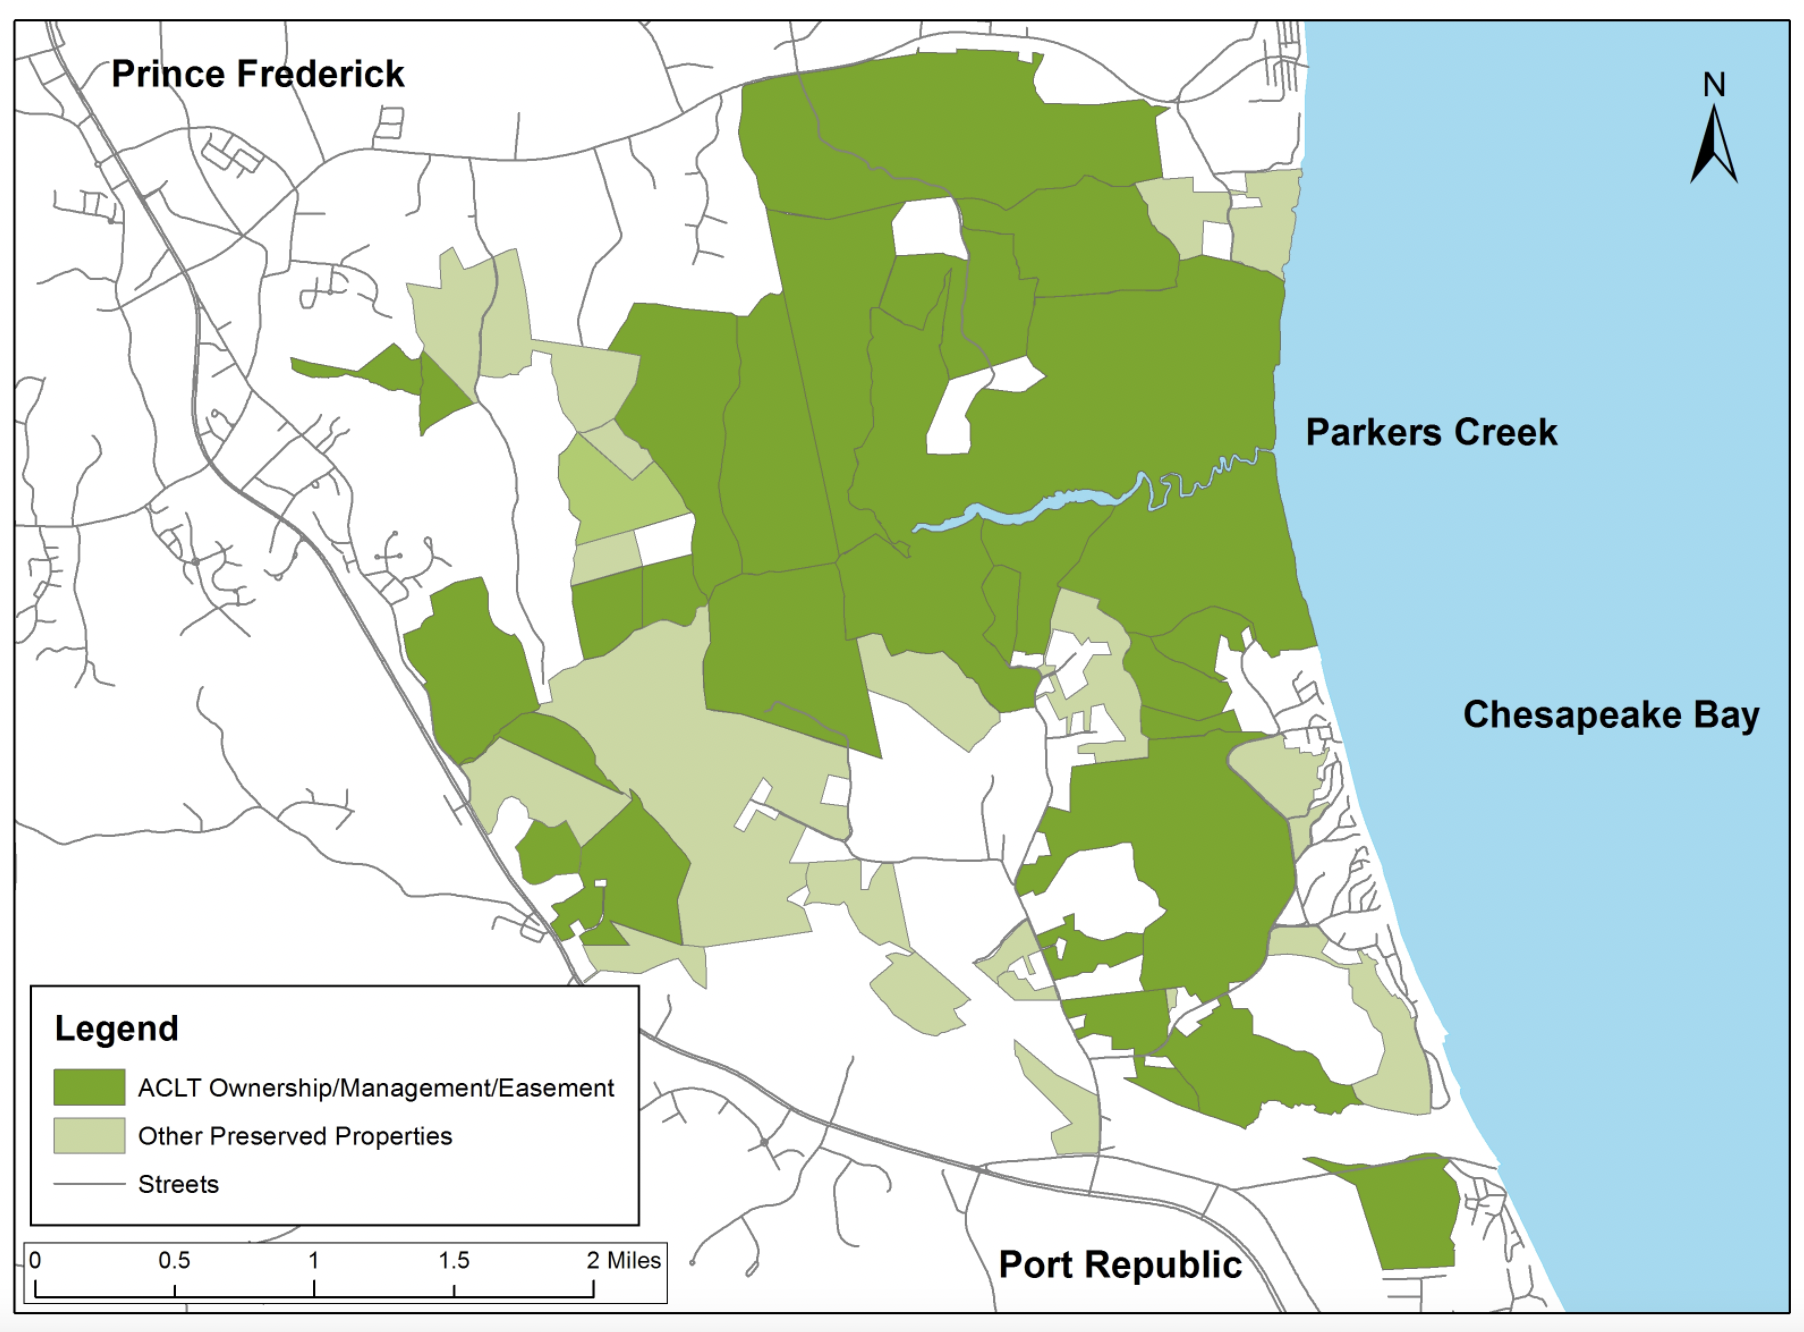 The purpose is to show how ACLT's protected lands buffer the Chesapeake Bay from the runoff of the Prince Frederick town center.